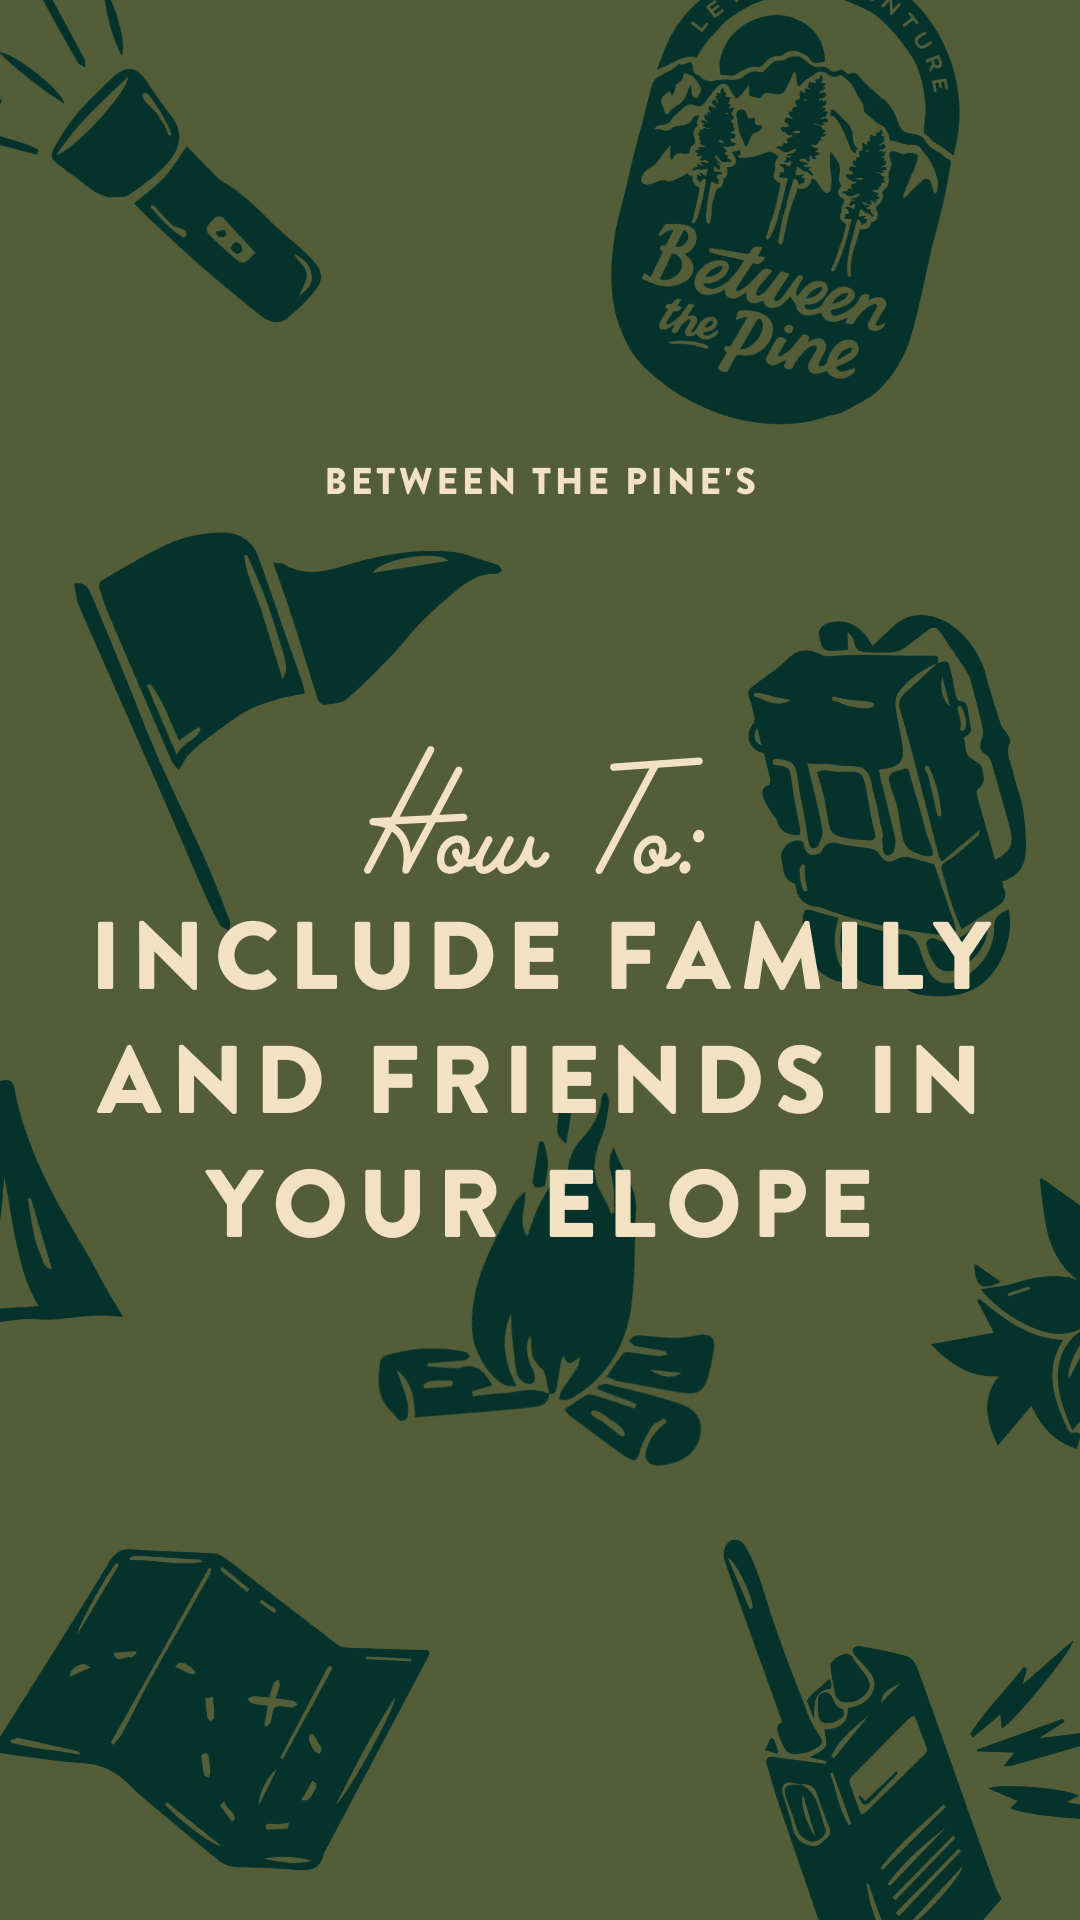 how to include family and friends in your elopement | between the pine elopement photography